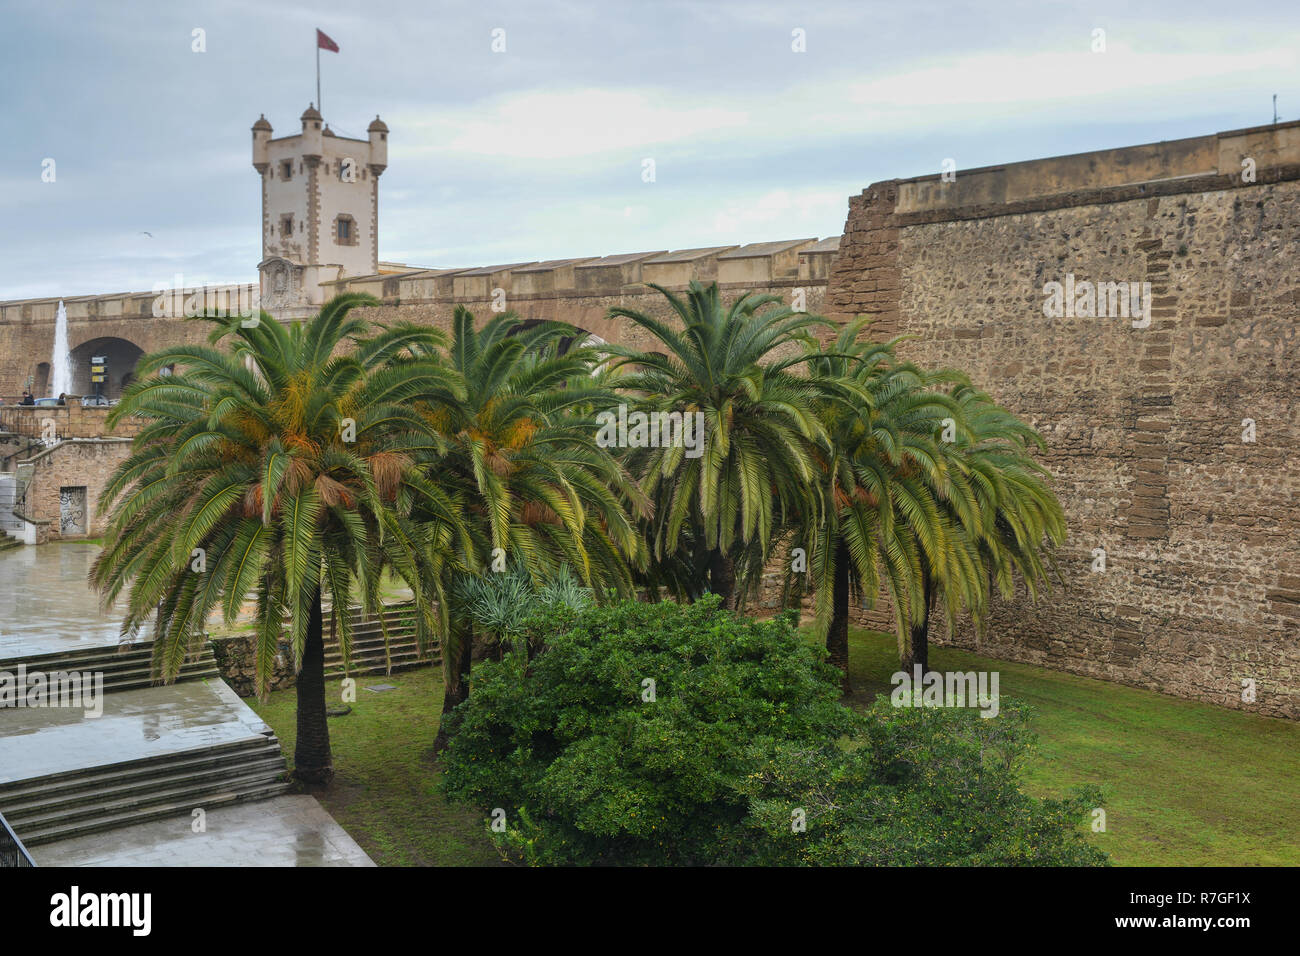 Puerta de Tierra is a fortress in Cadiz. Landmark of the 16th century on the Atlantic coast of Andalusia in Spain. Stock Photo